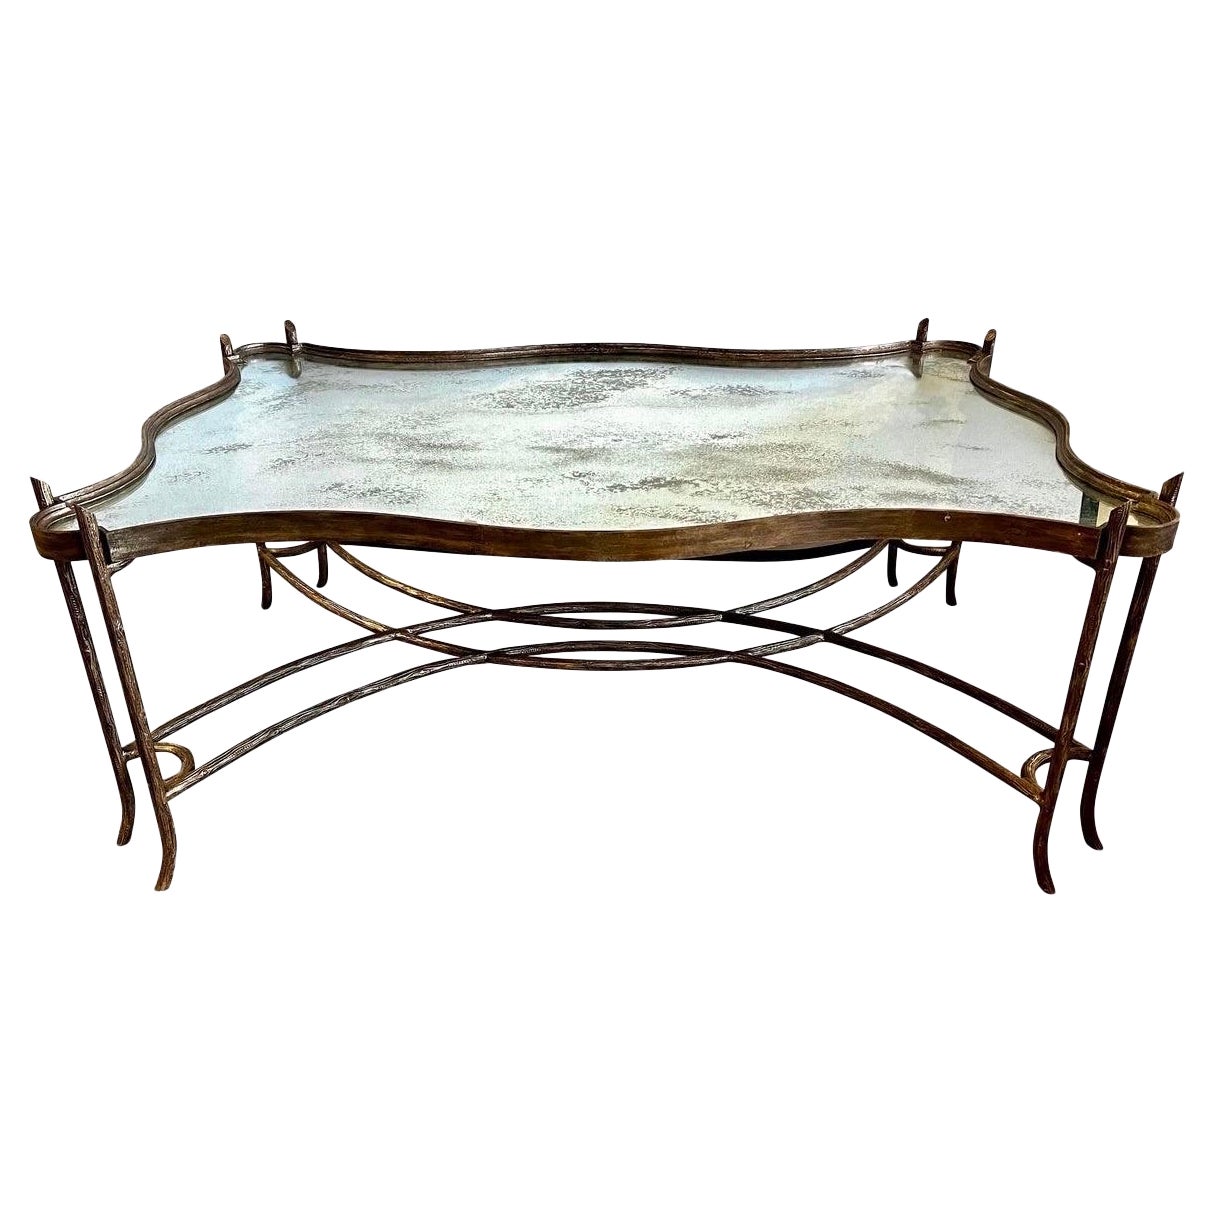 Eglomise Mirrored and Gilded Iron Faux Bois Coffee Cocktail Table Art Deco For Sale